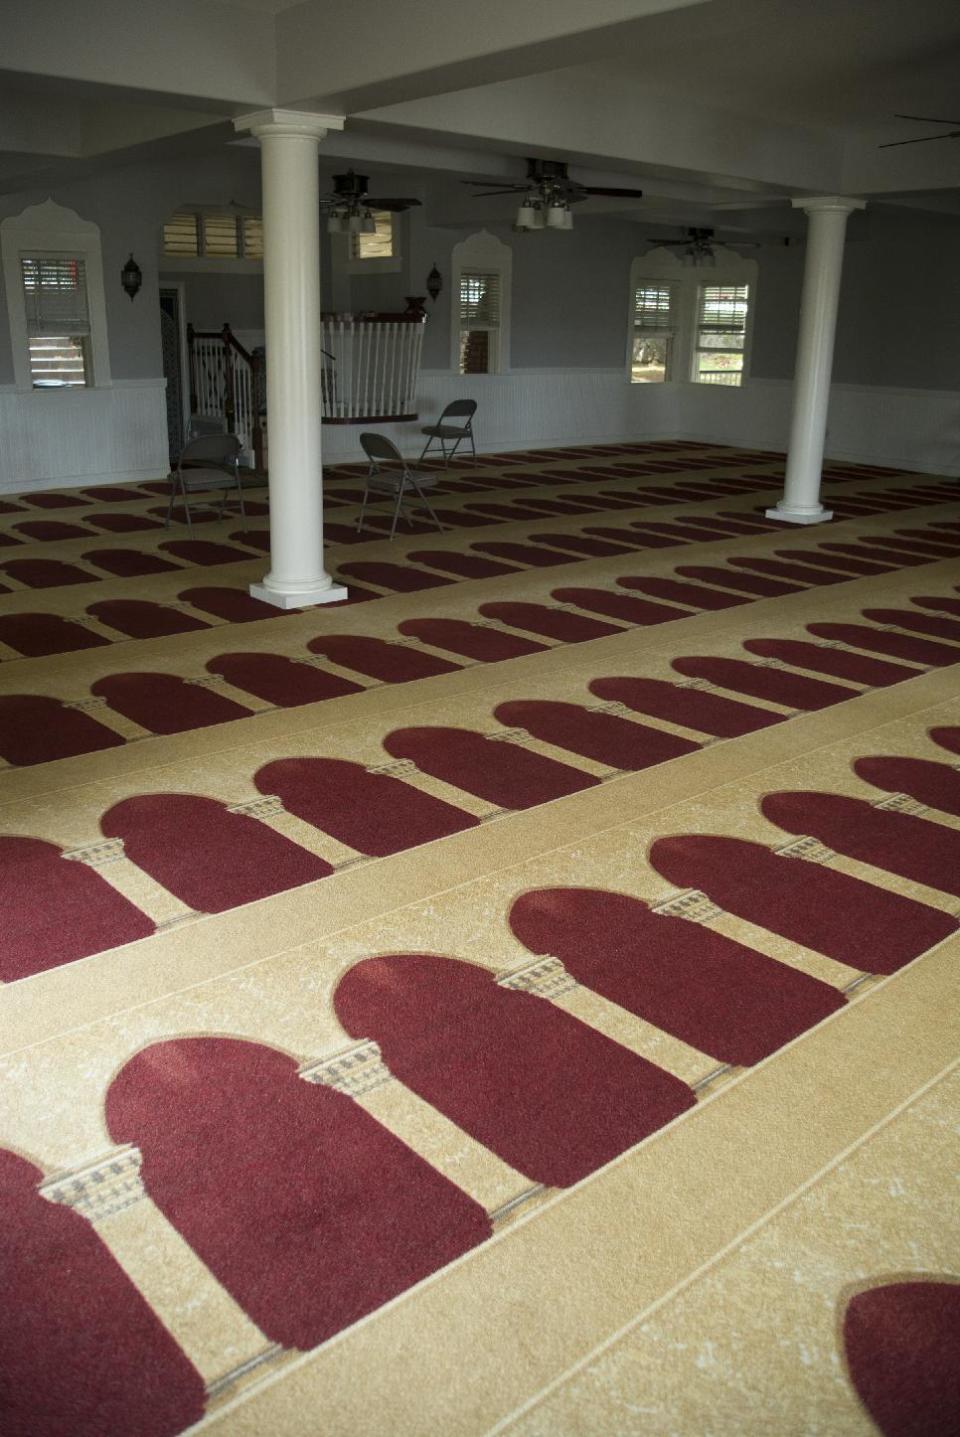 This Thursday, March 9, 2107 photo shows the prayer room of the Muslim Association of Hawaii building in Manoa Valley in Honolulu. The mosque has been serving Hawaii for nearly 50 years, according to the group. The column designs on the carpet are designed to face Mecca. (AP Photo/Marco Garcia)